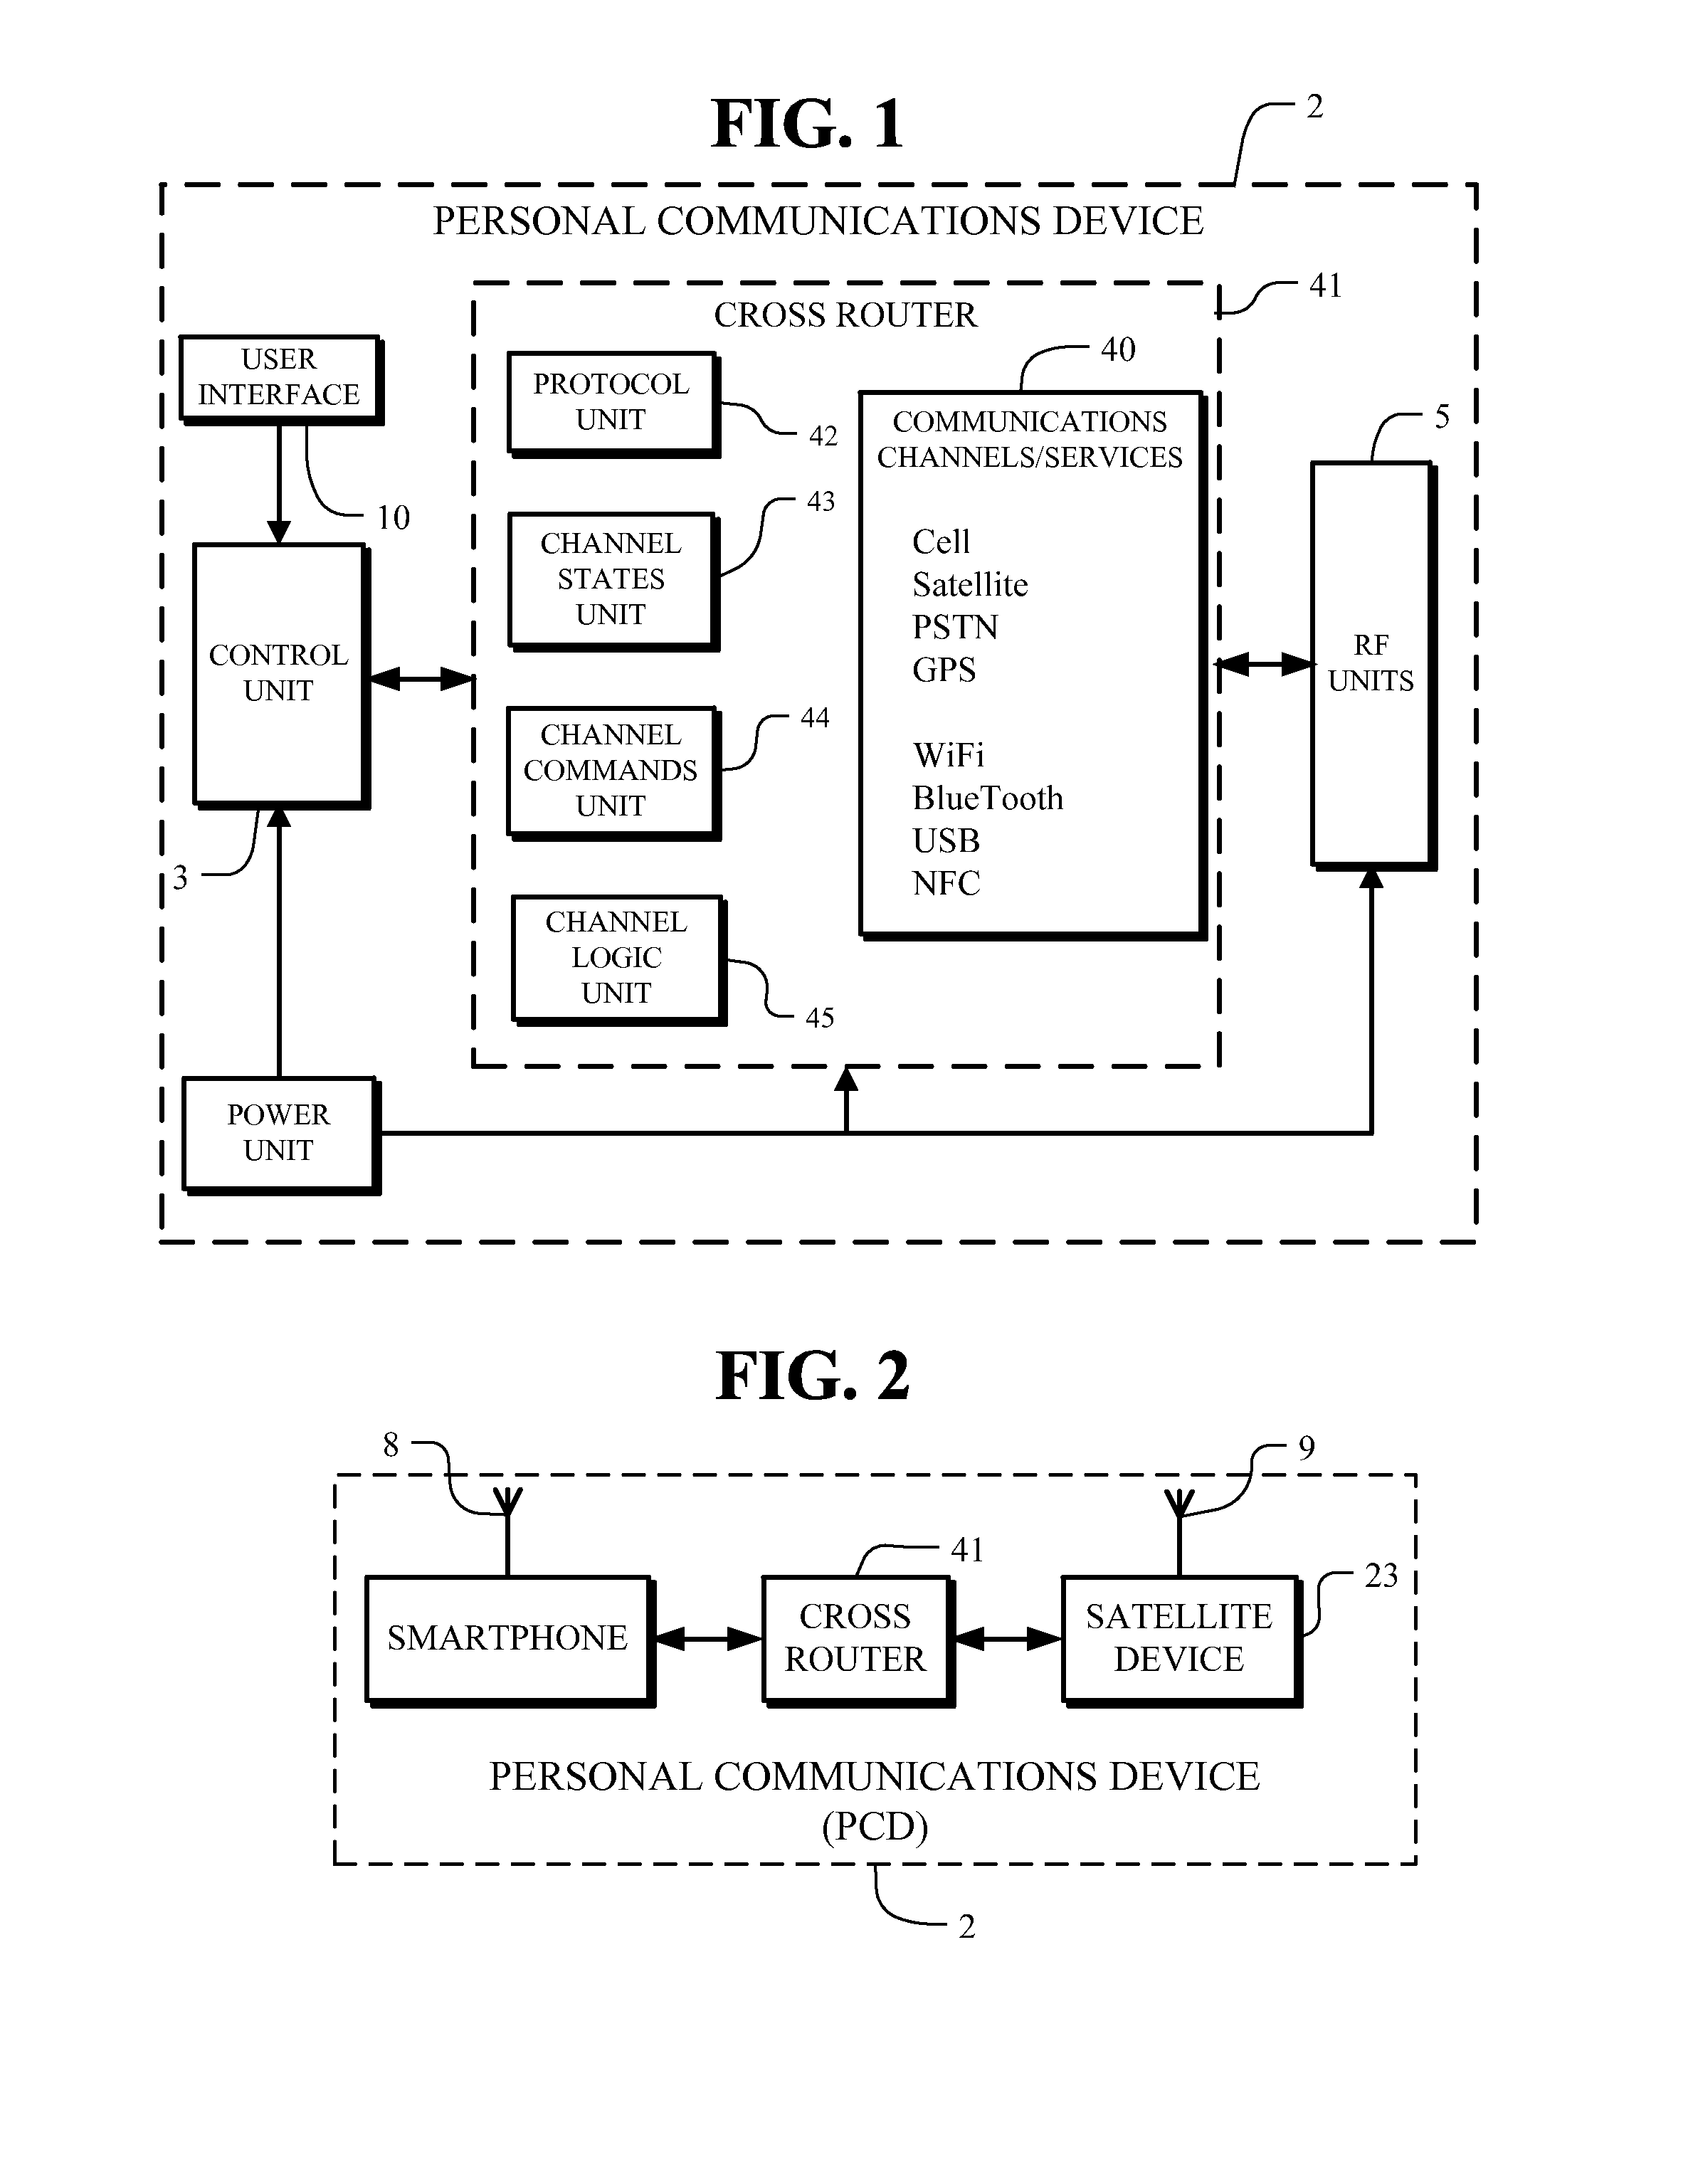 Personal communications device with cross router